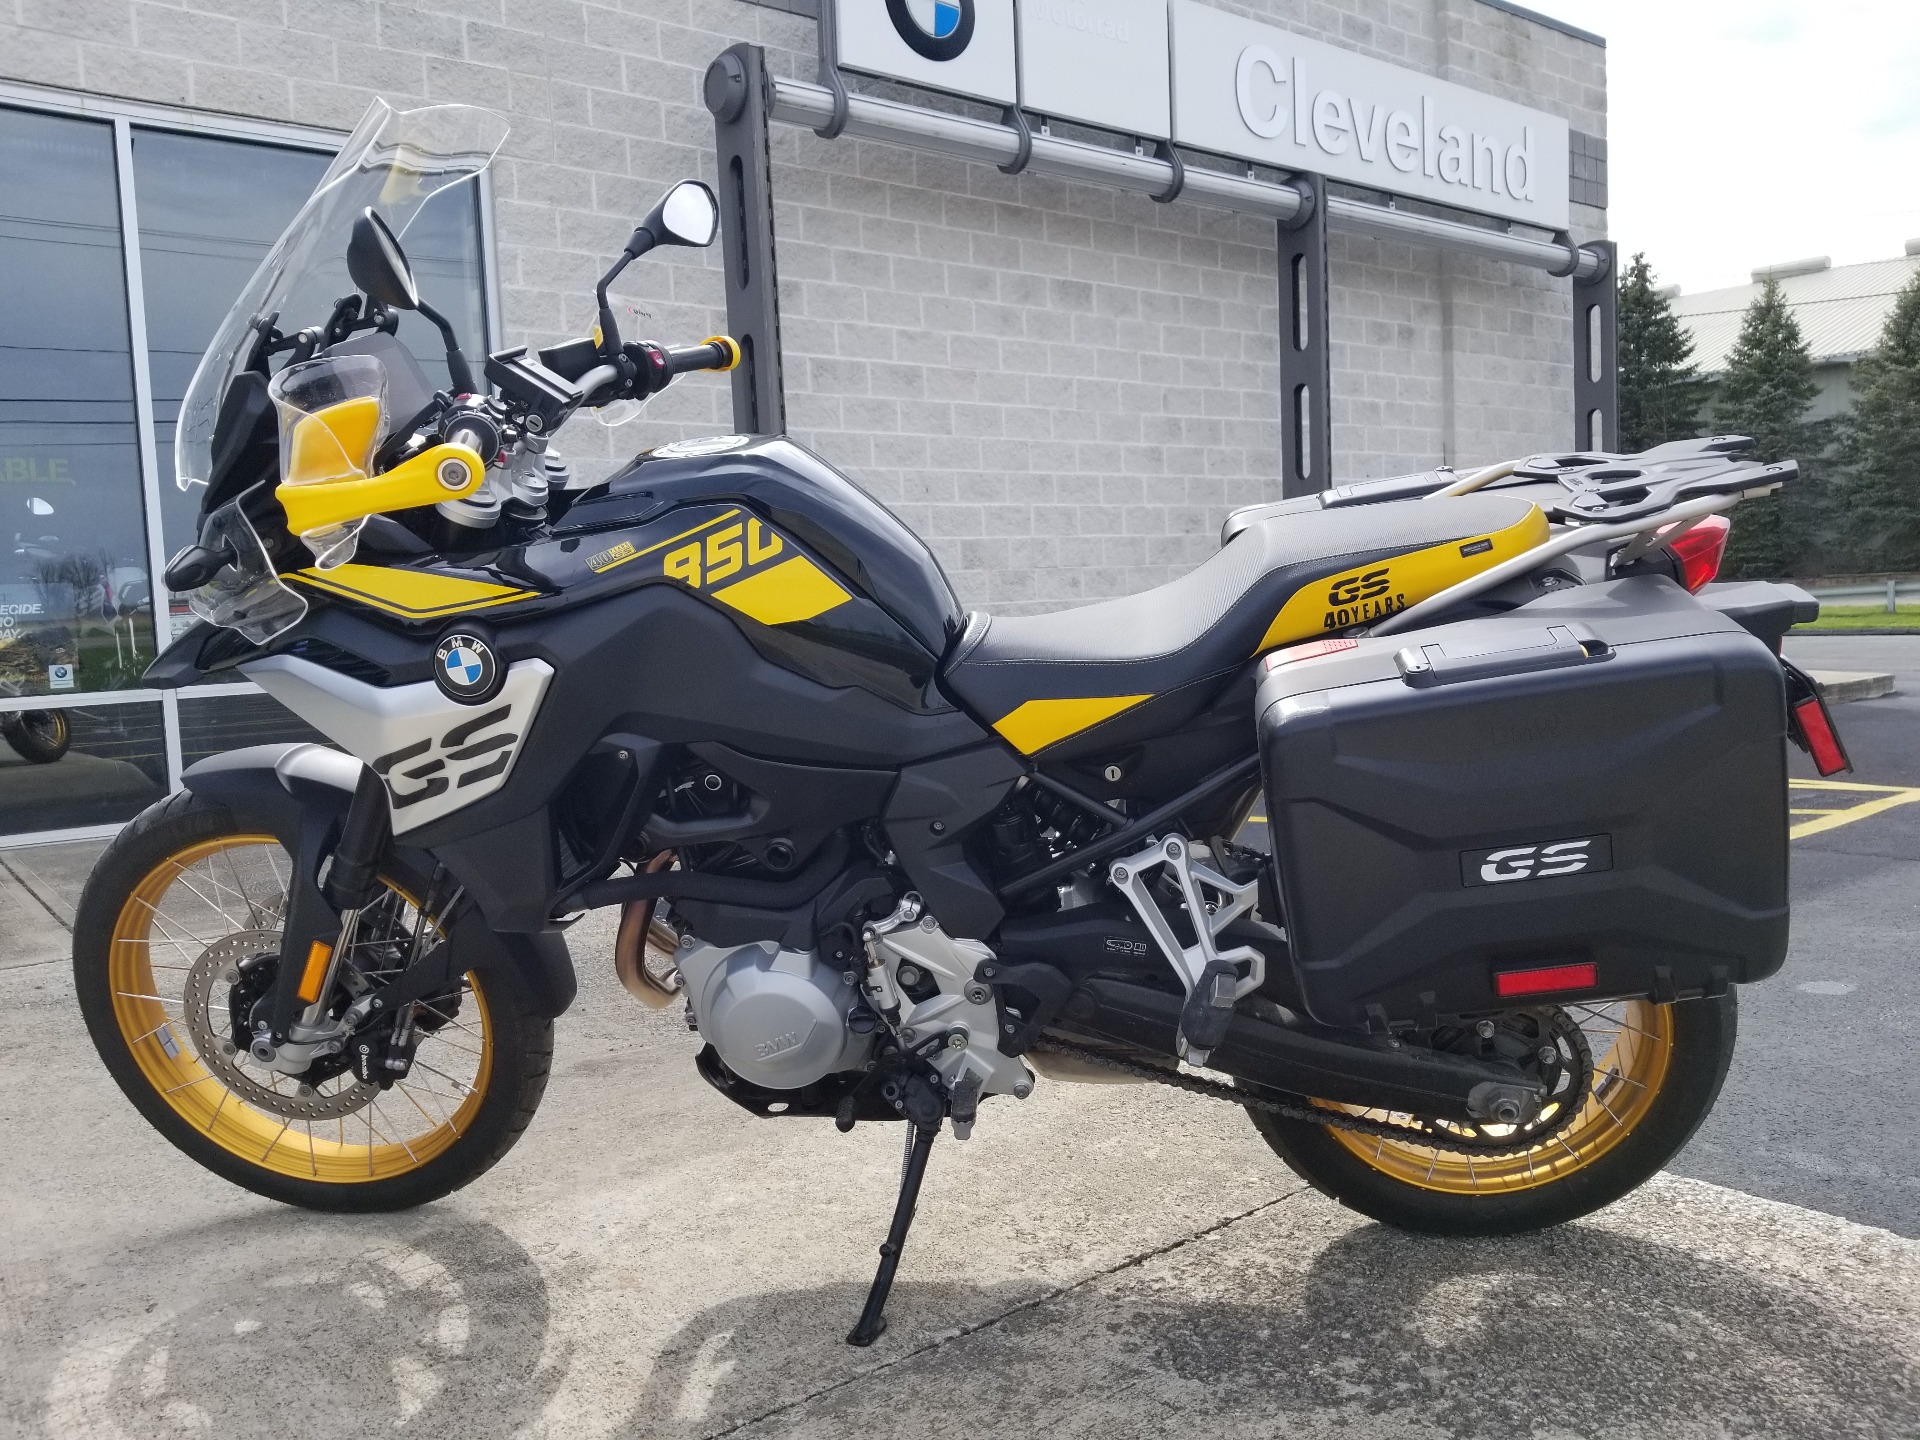 2021 BMW F 850 GS - 40 Years of GS Edition in Aurora, Ohio - Photo 2